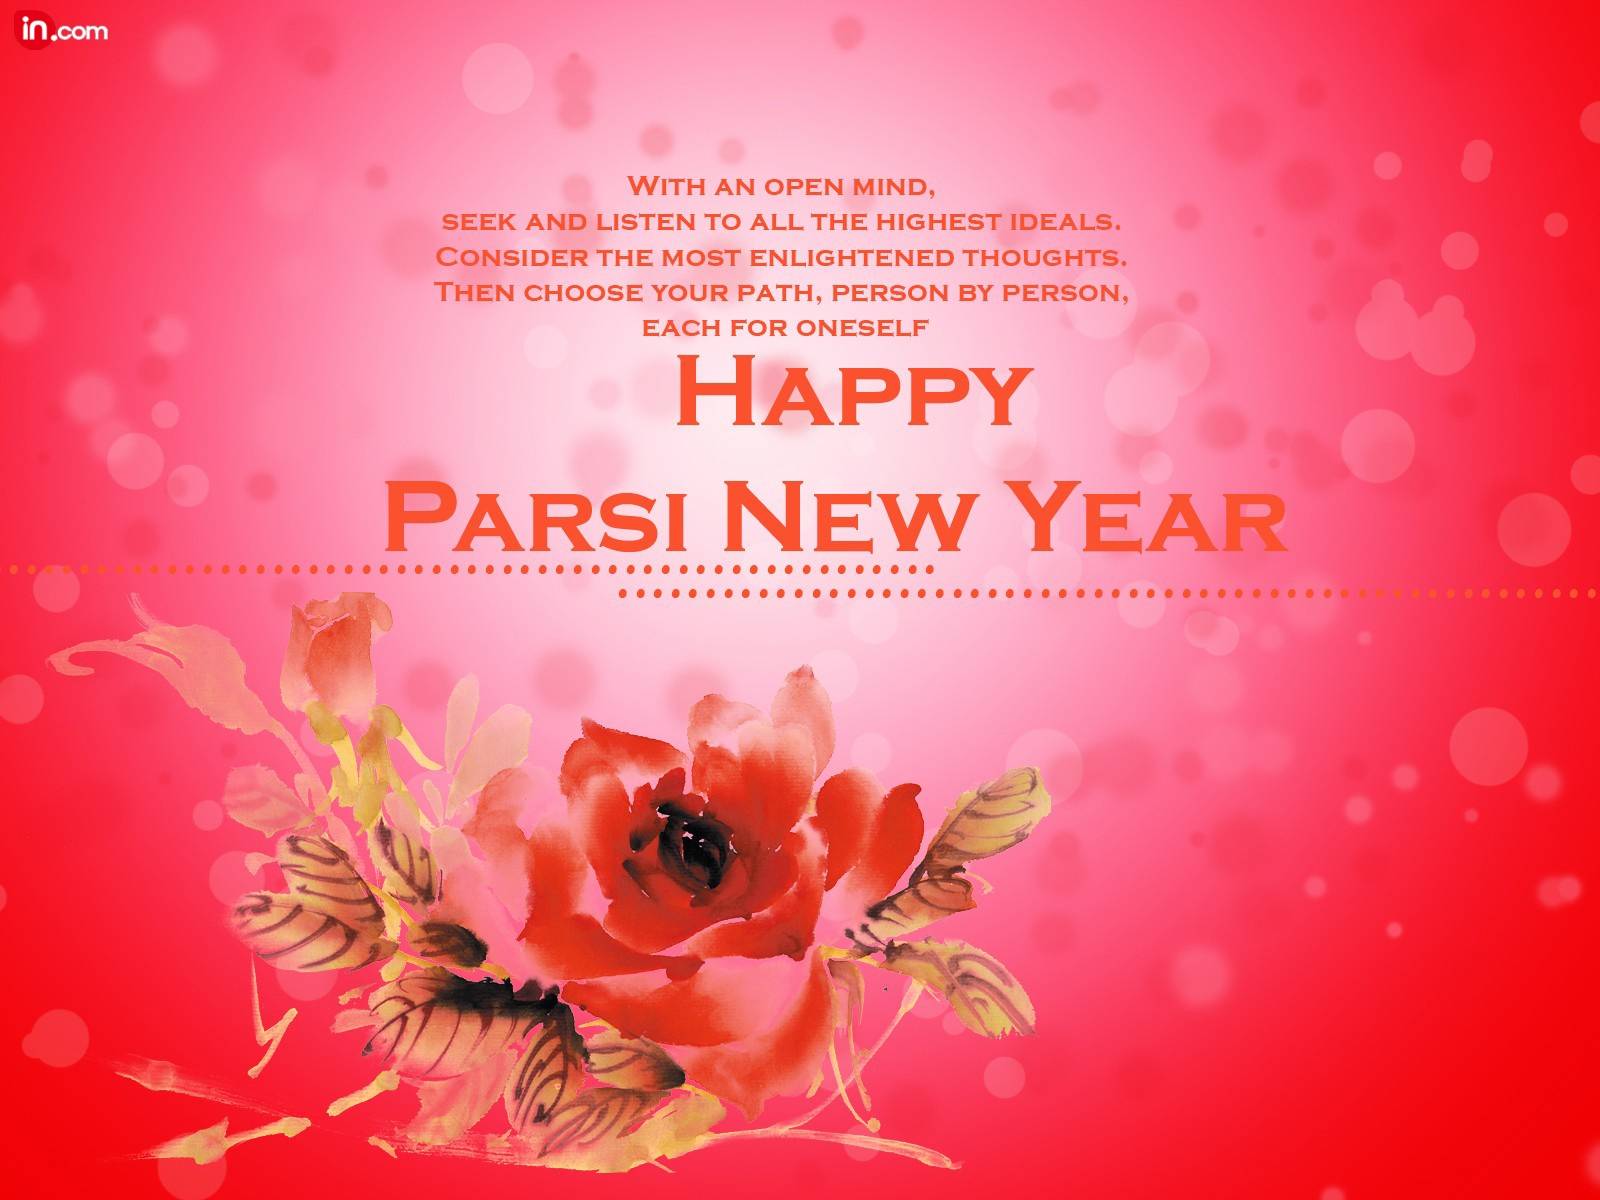 with an open mind, seek and listen to all the highest ideals happy parsi new year